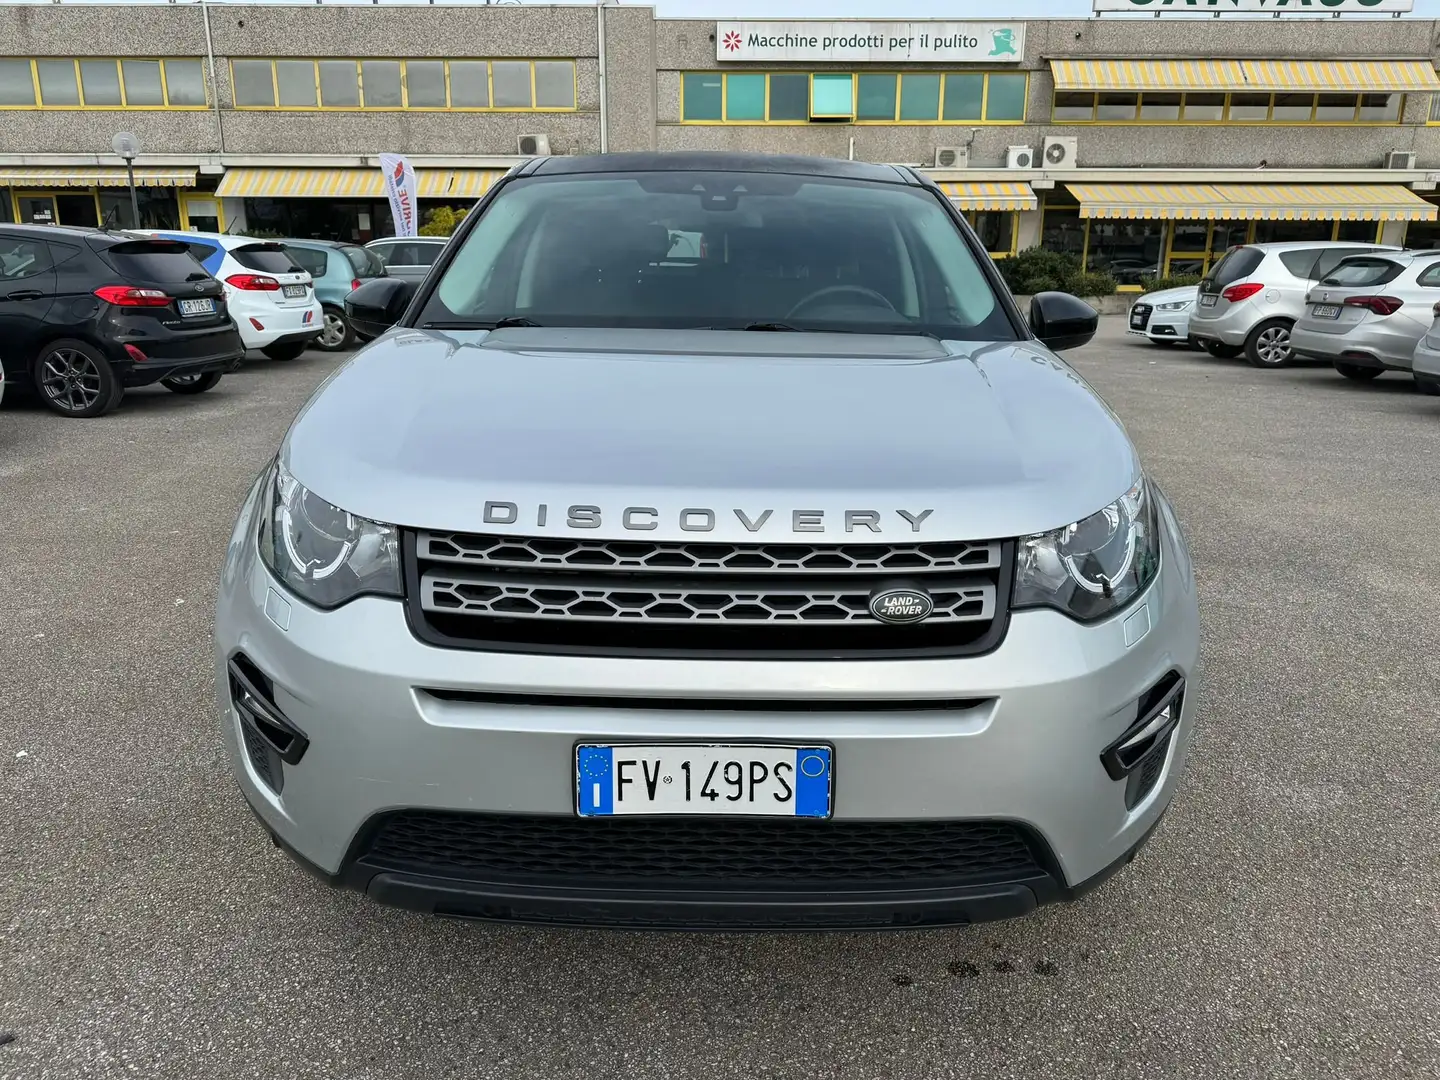 Land Rover Discovery Sport 2.0 Pure 150cv - Manuale - Fatturabile - FV149PS Argento - 2